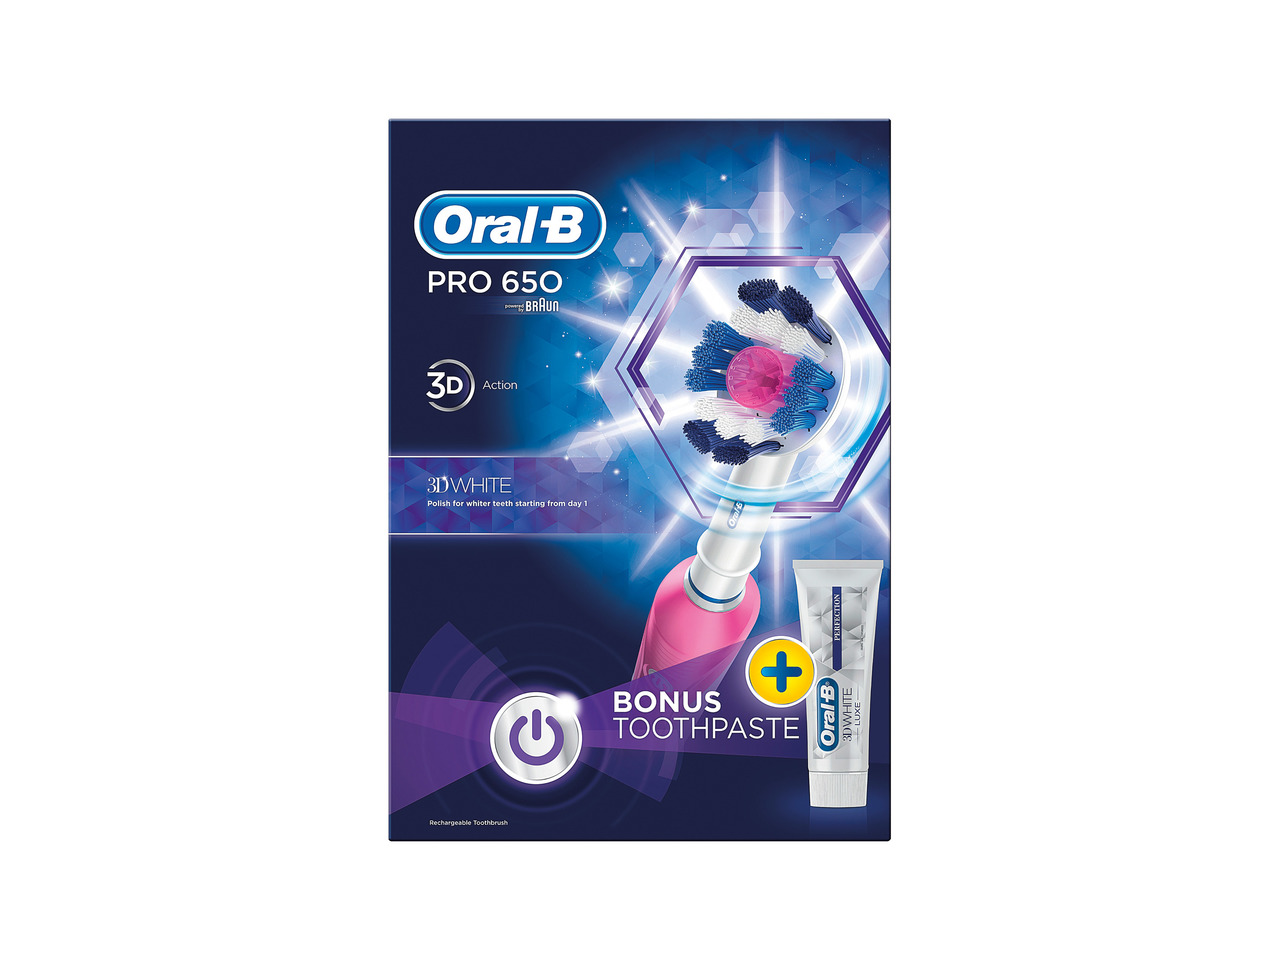 Oral B Pro 650 3D Action Electric Toothbrush with Toothpaste1